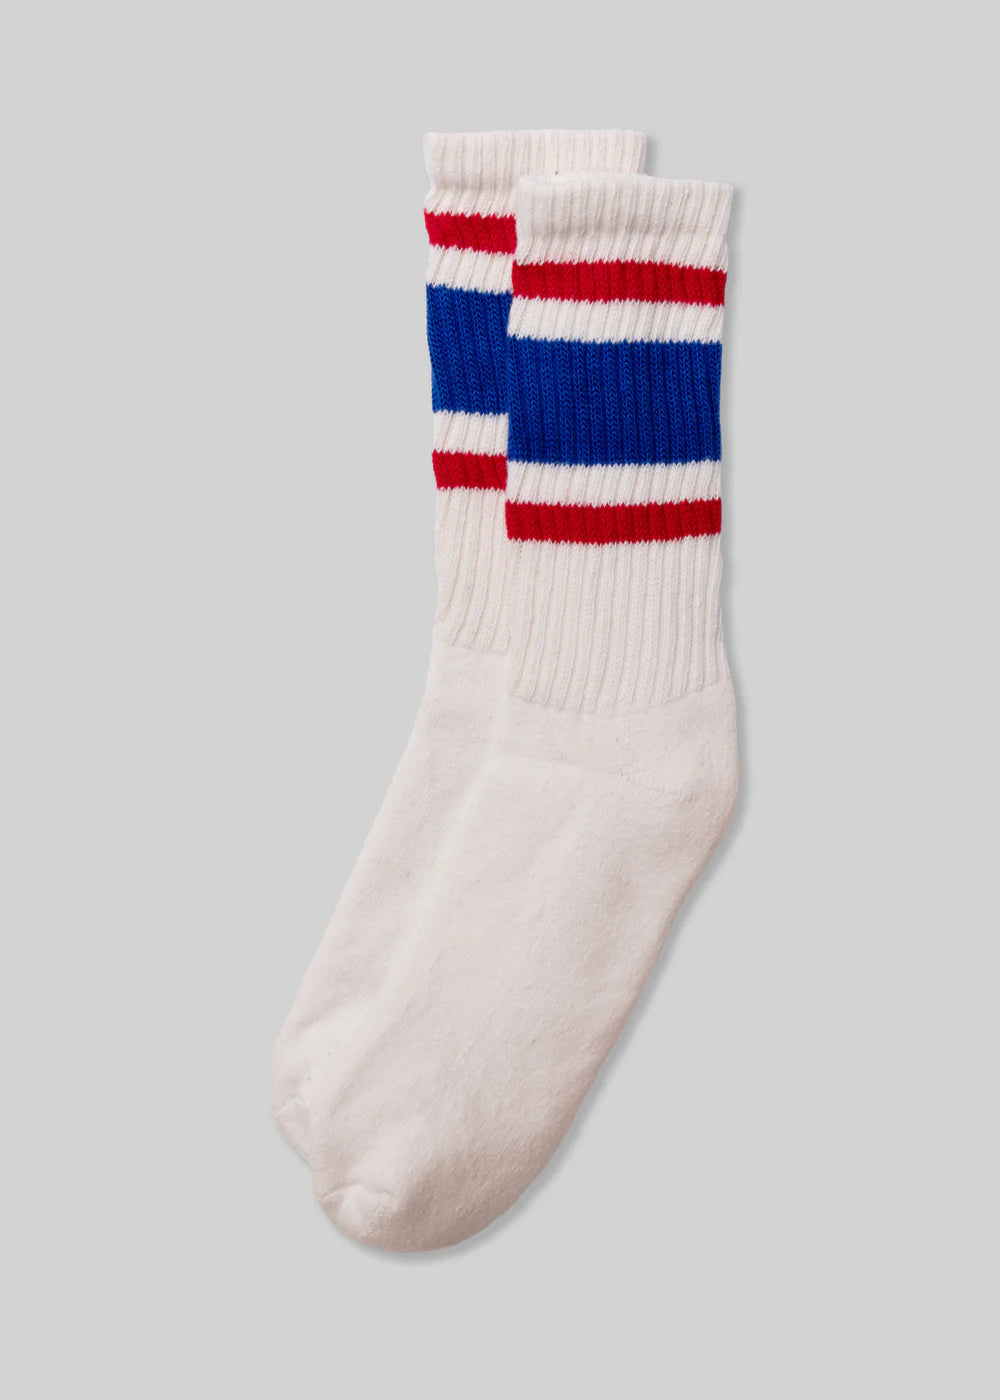 American trench - the retro stripe sock  -  royal/red